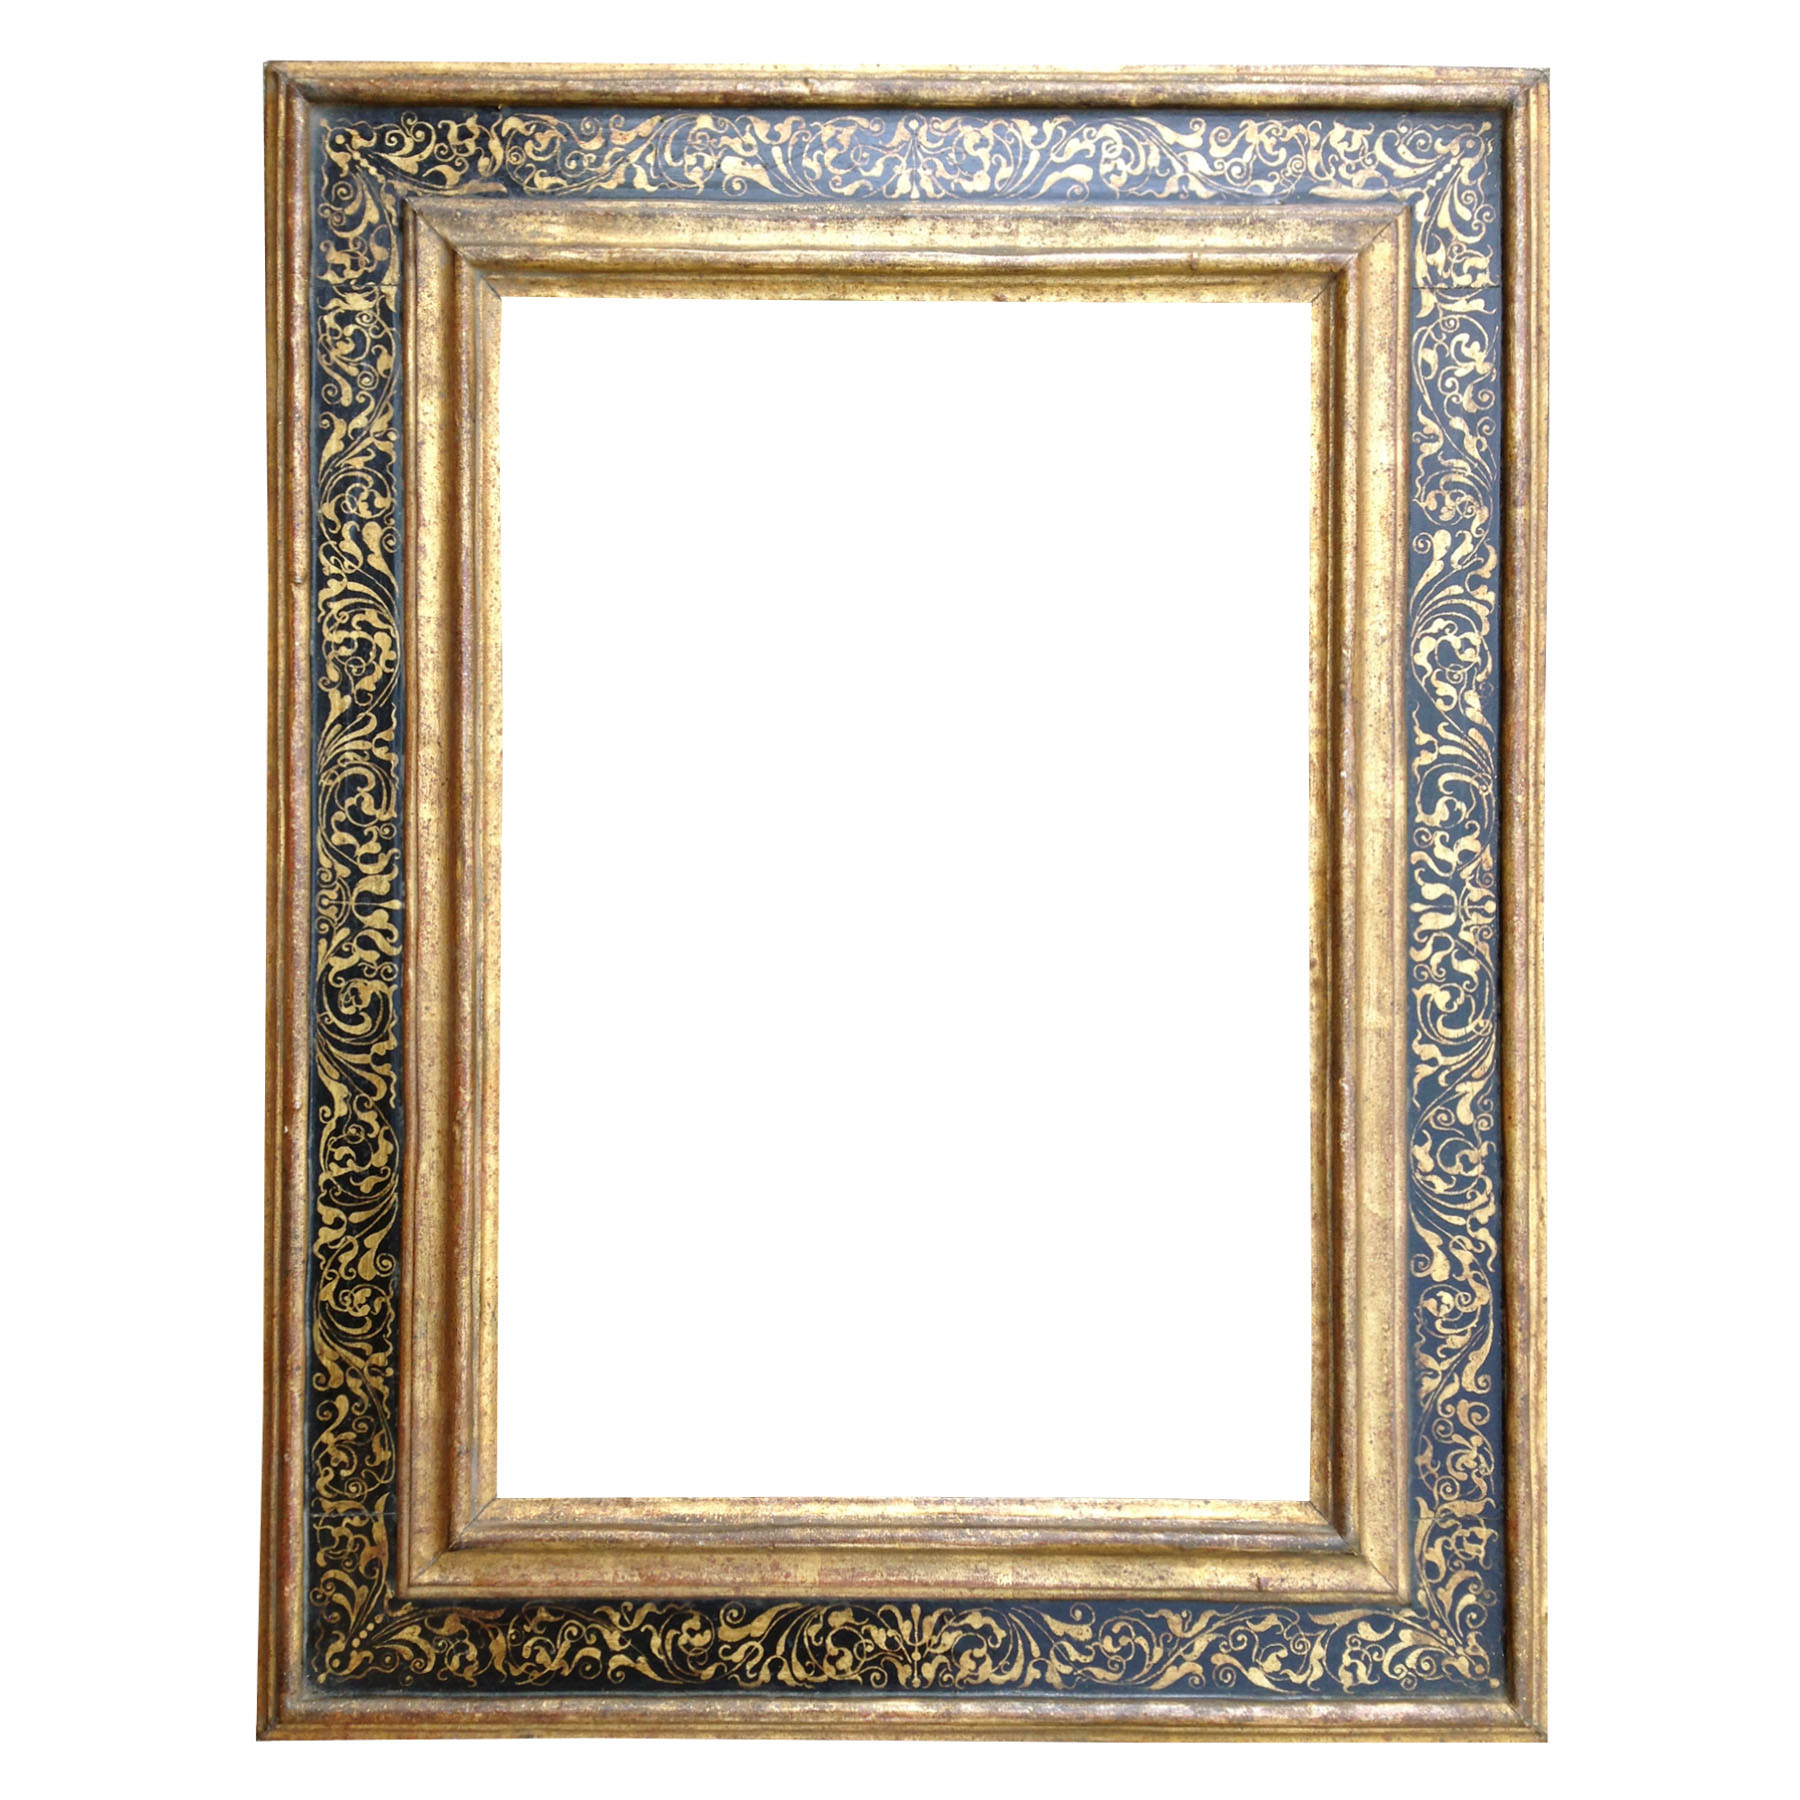 Reproduction 16th century frame